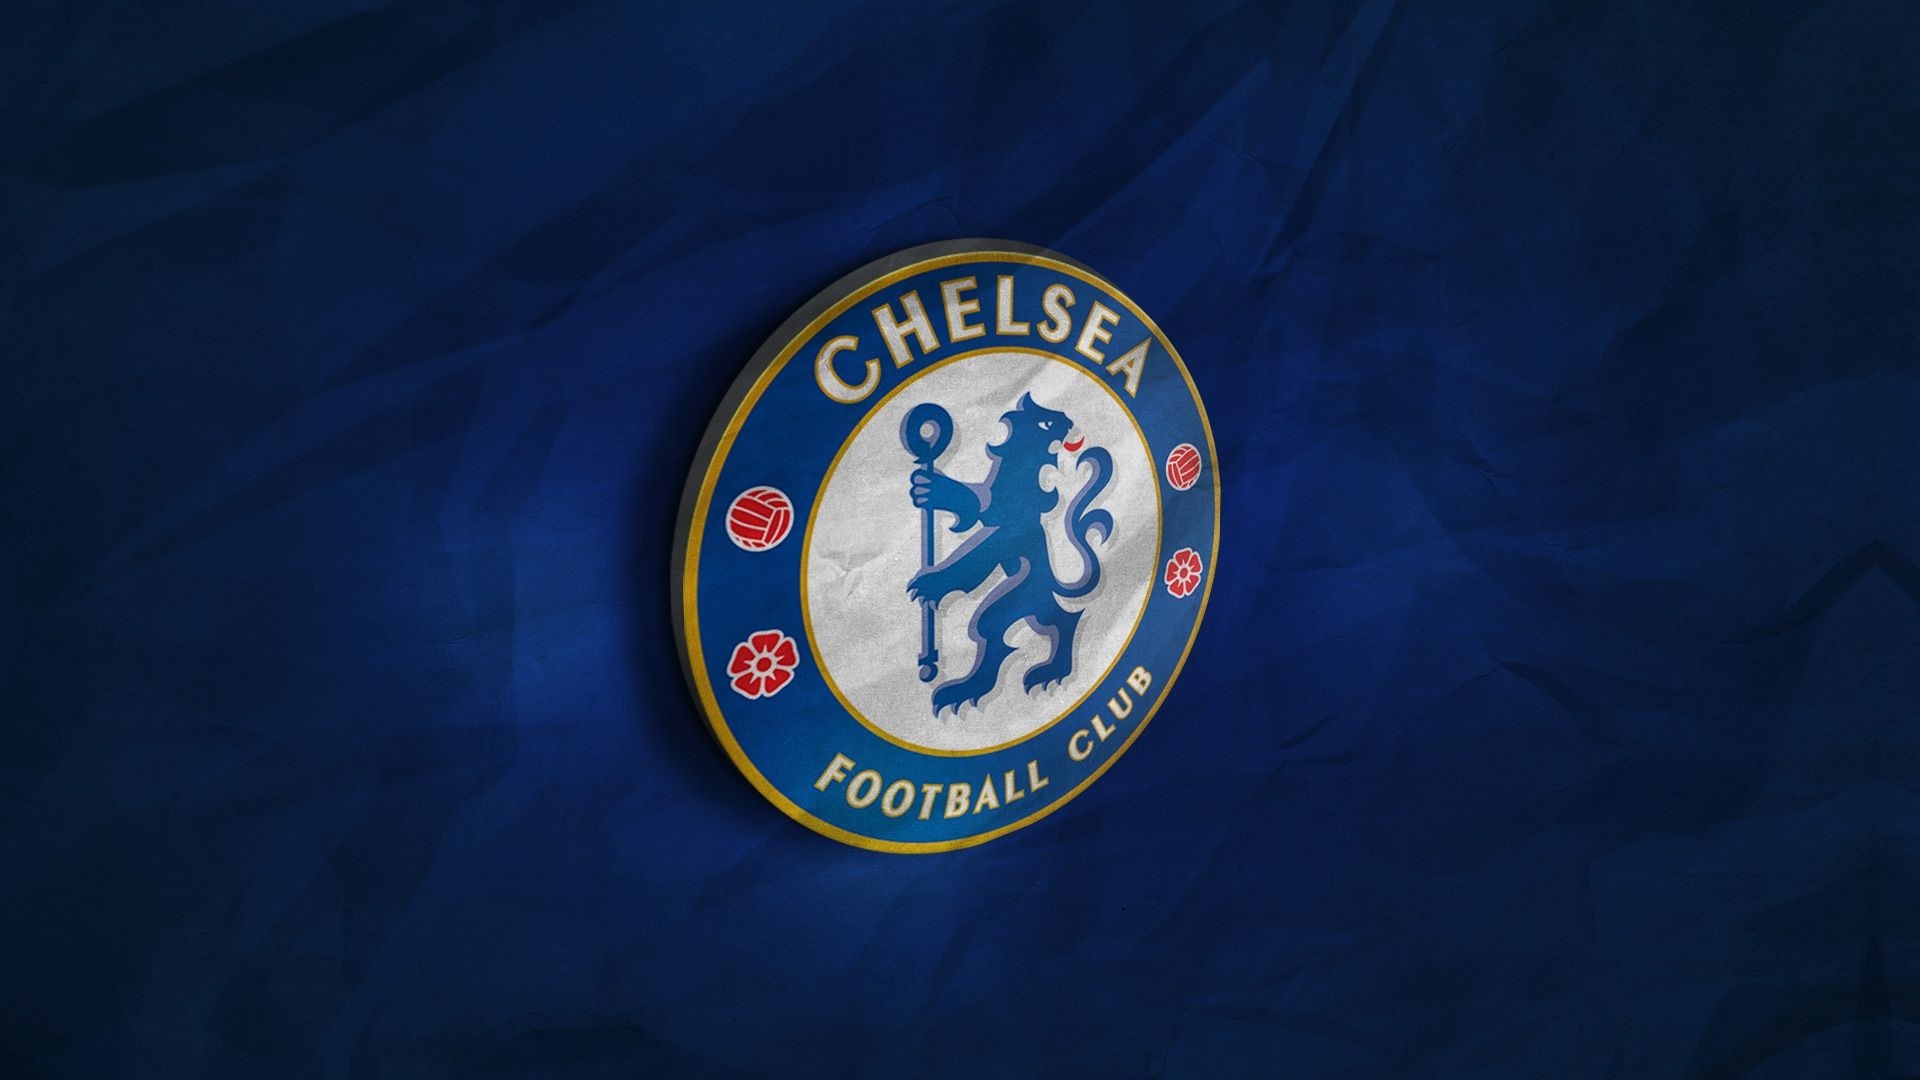 Chelsea Logo Desktop Wallpapers With high-resolution 1920X1080 pixel. You can use this wallpaper for your Desktop Computers, Mac Screensavers, Windows Backgrounds, iPhone Wallpapers, Tablet or Android Lock screen and another Mobile device